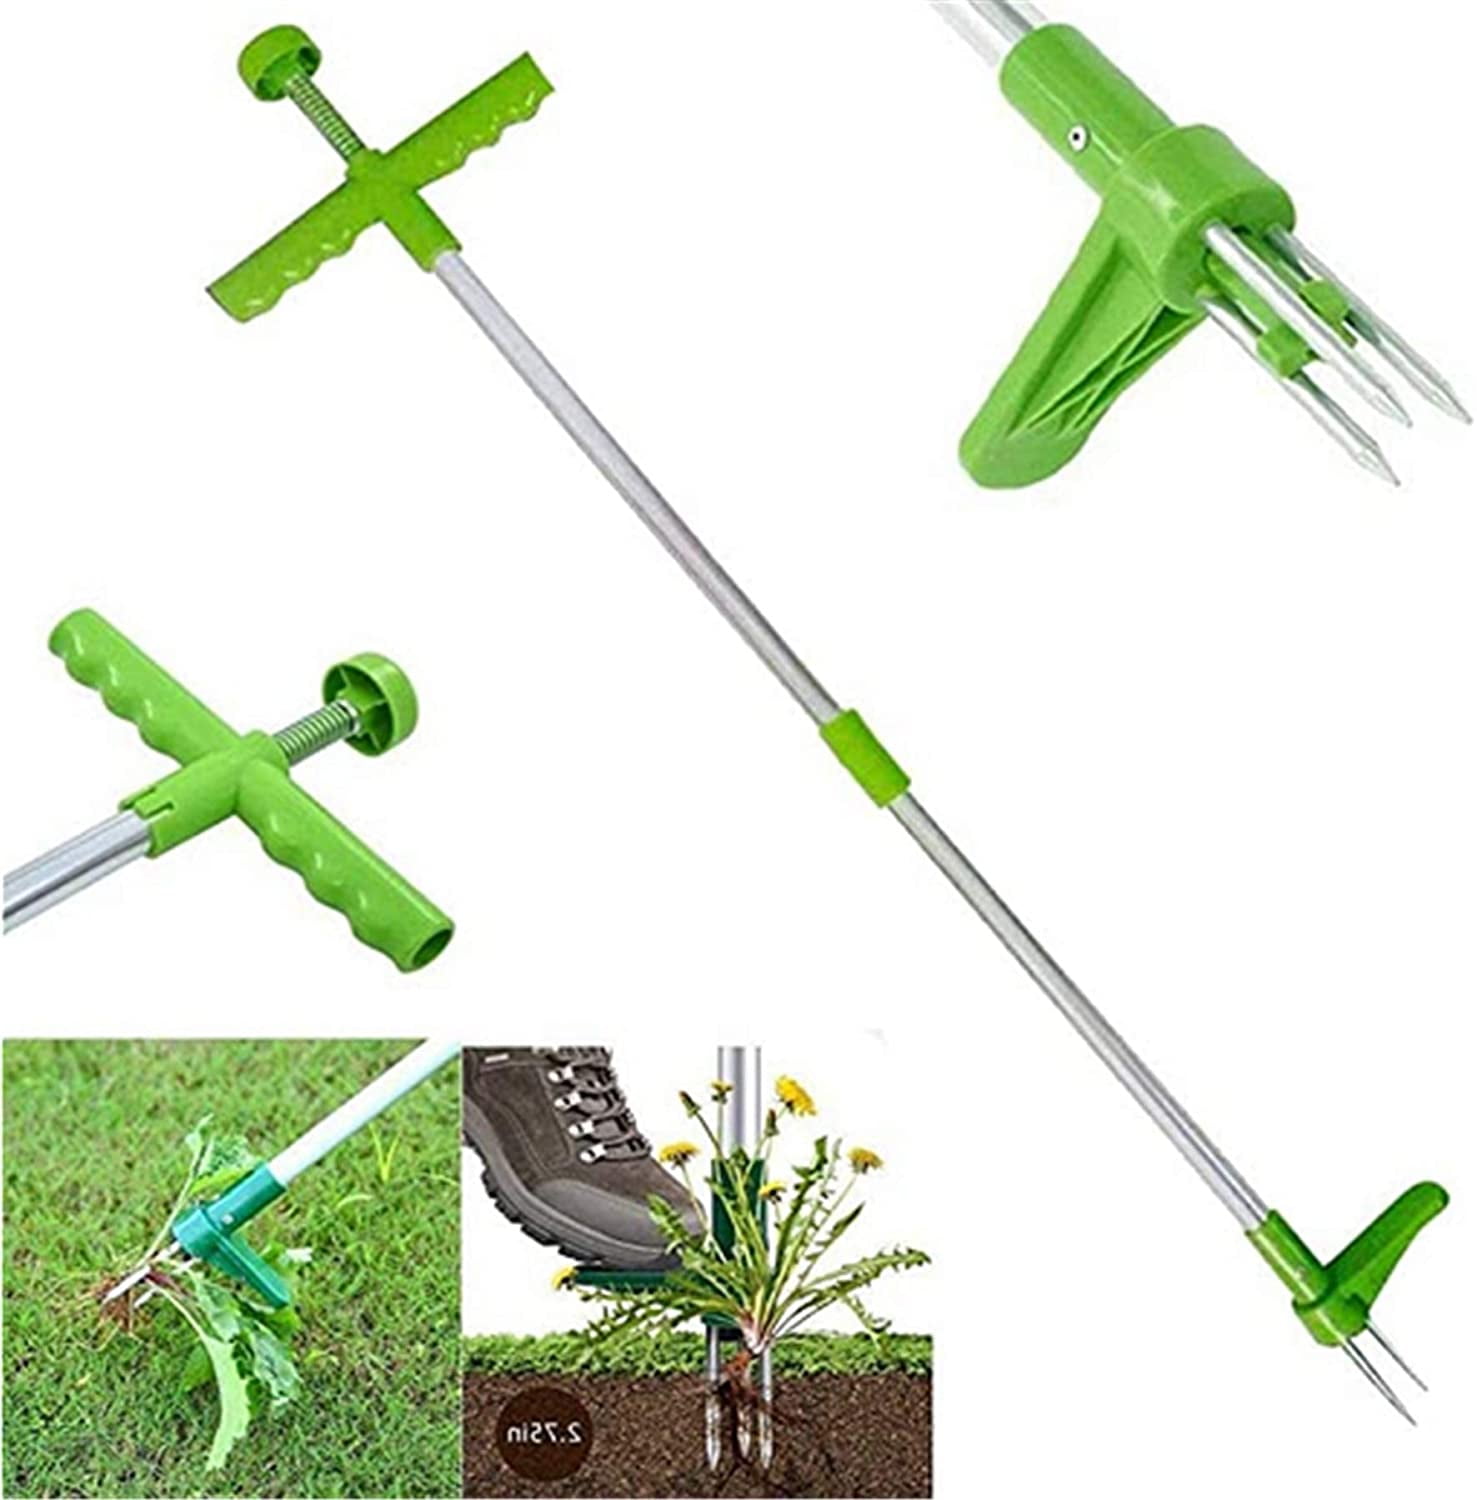 Paradesour Weeding Tool Weed Root Extractor Weeder Long Handled Lawn For Garden Yard